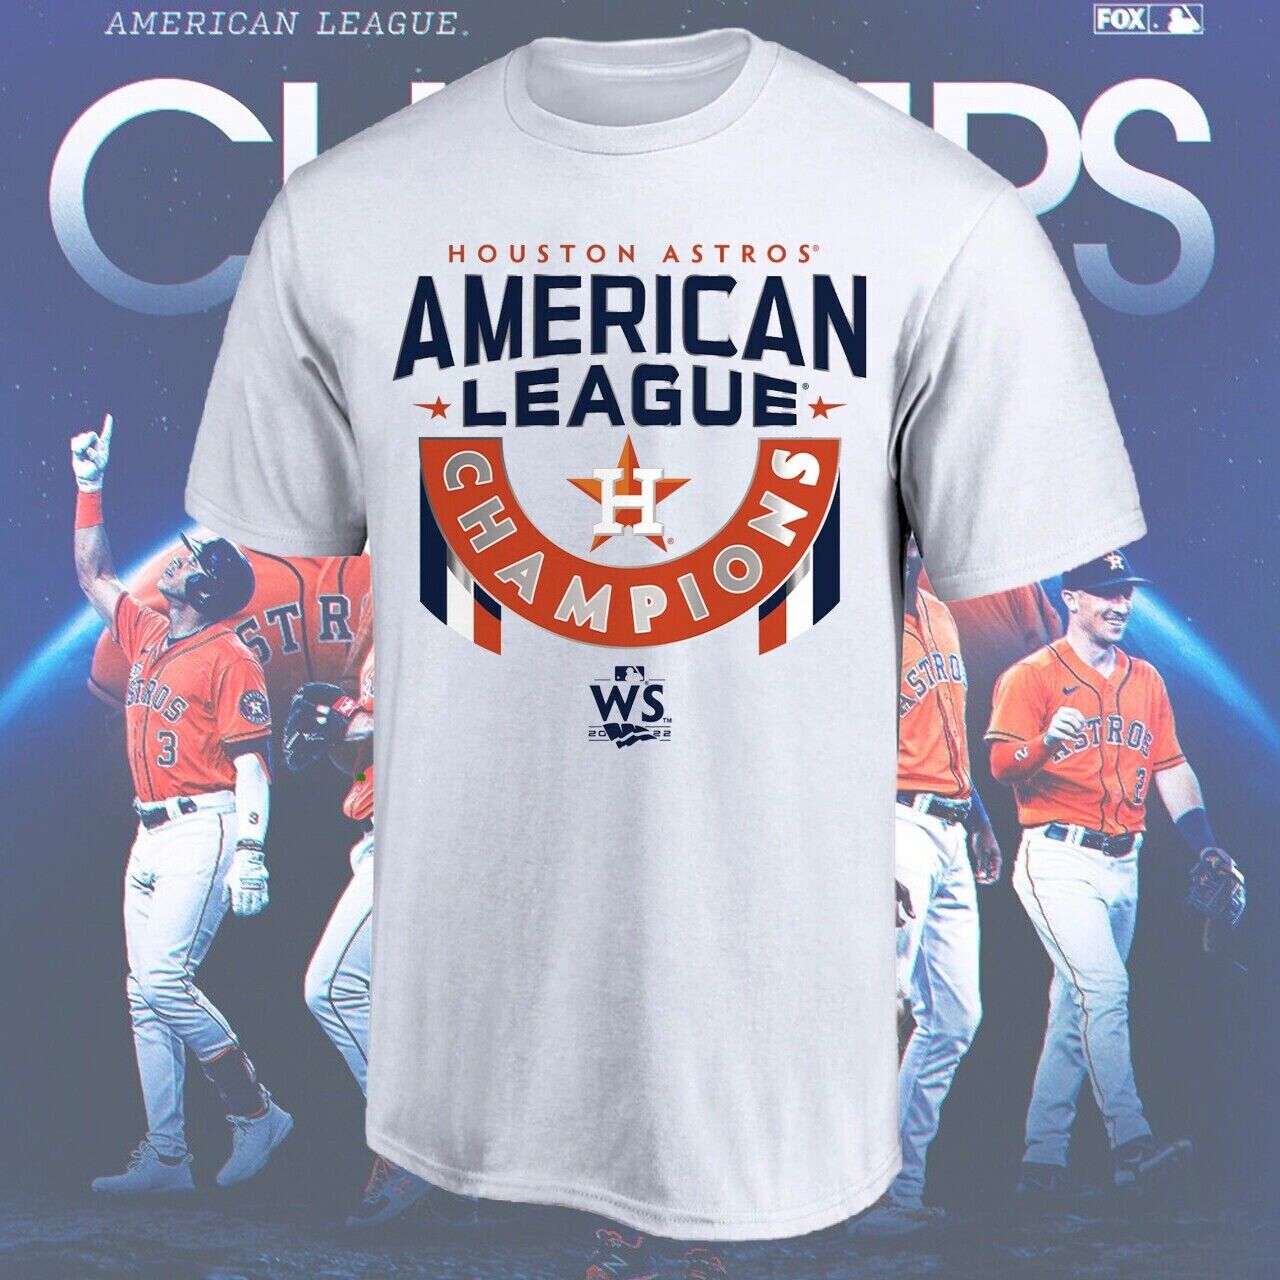 Houston Astros 2022 American League Champions Baseball Team T Shirt Plus Size Up To 5xl